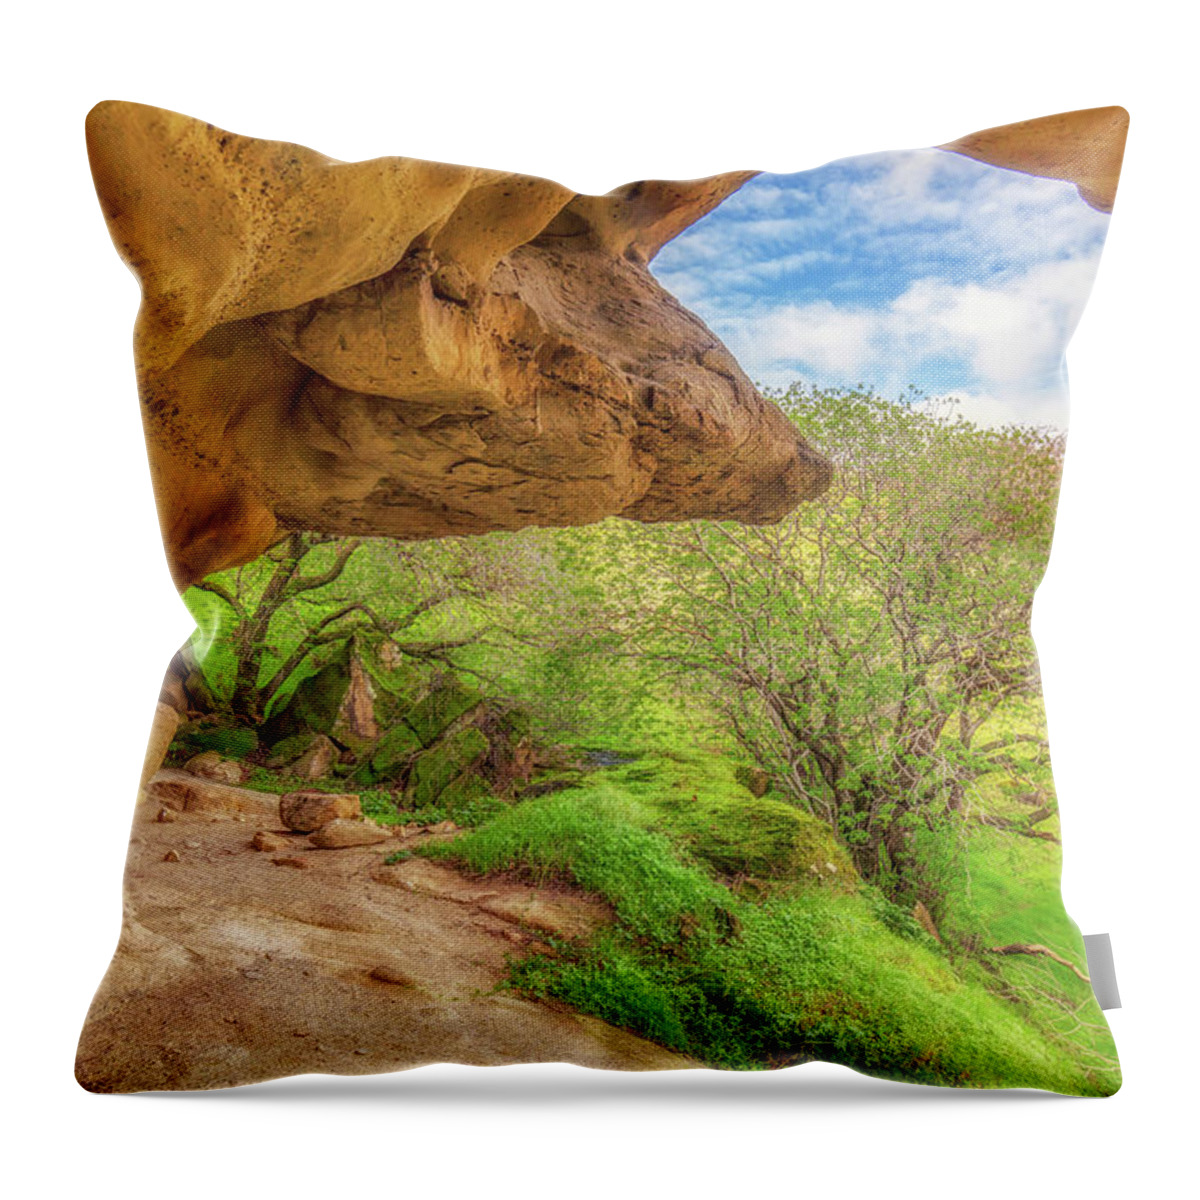 Landscape Throw Pillow featuring the photograph Vasco Caves Landscape by Marc Crumpler